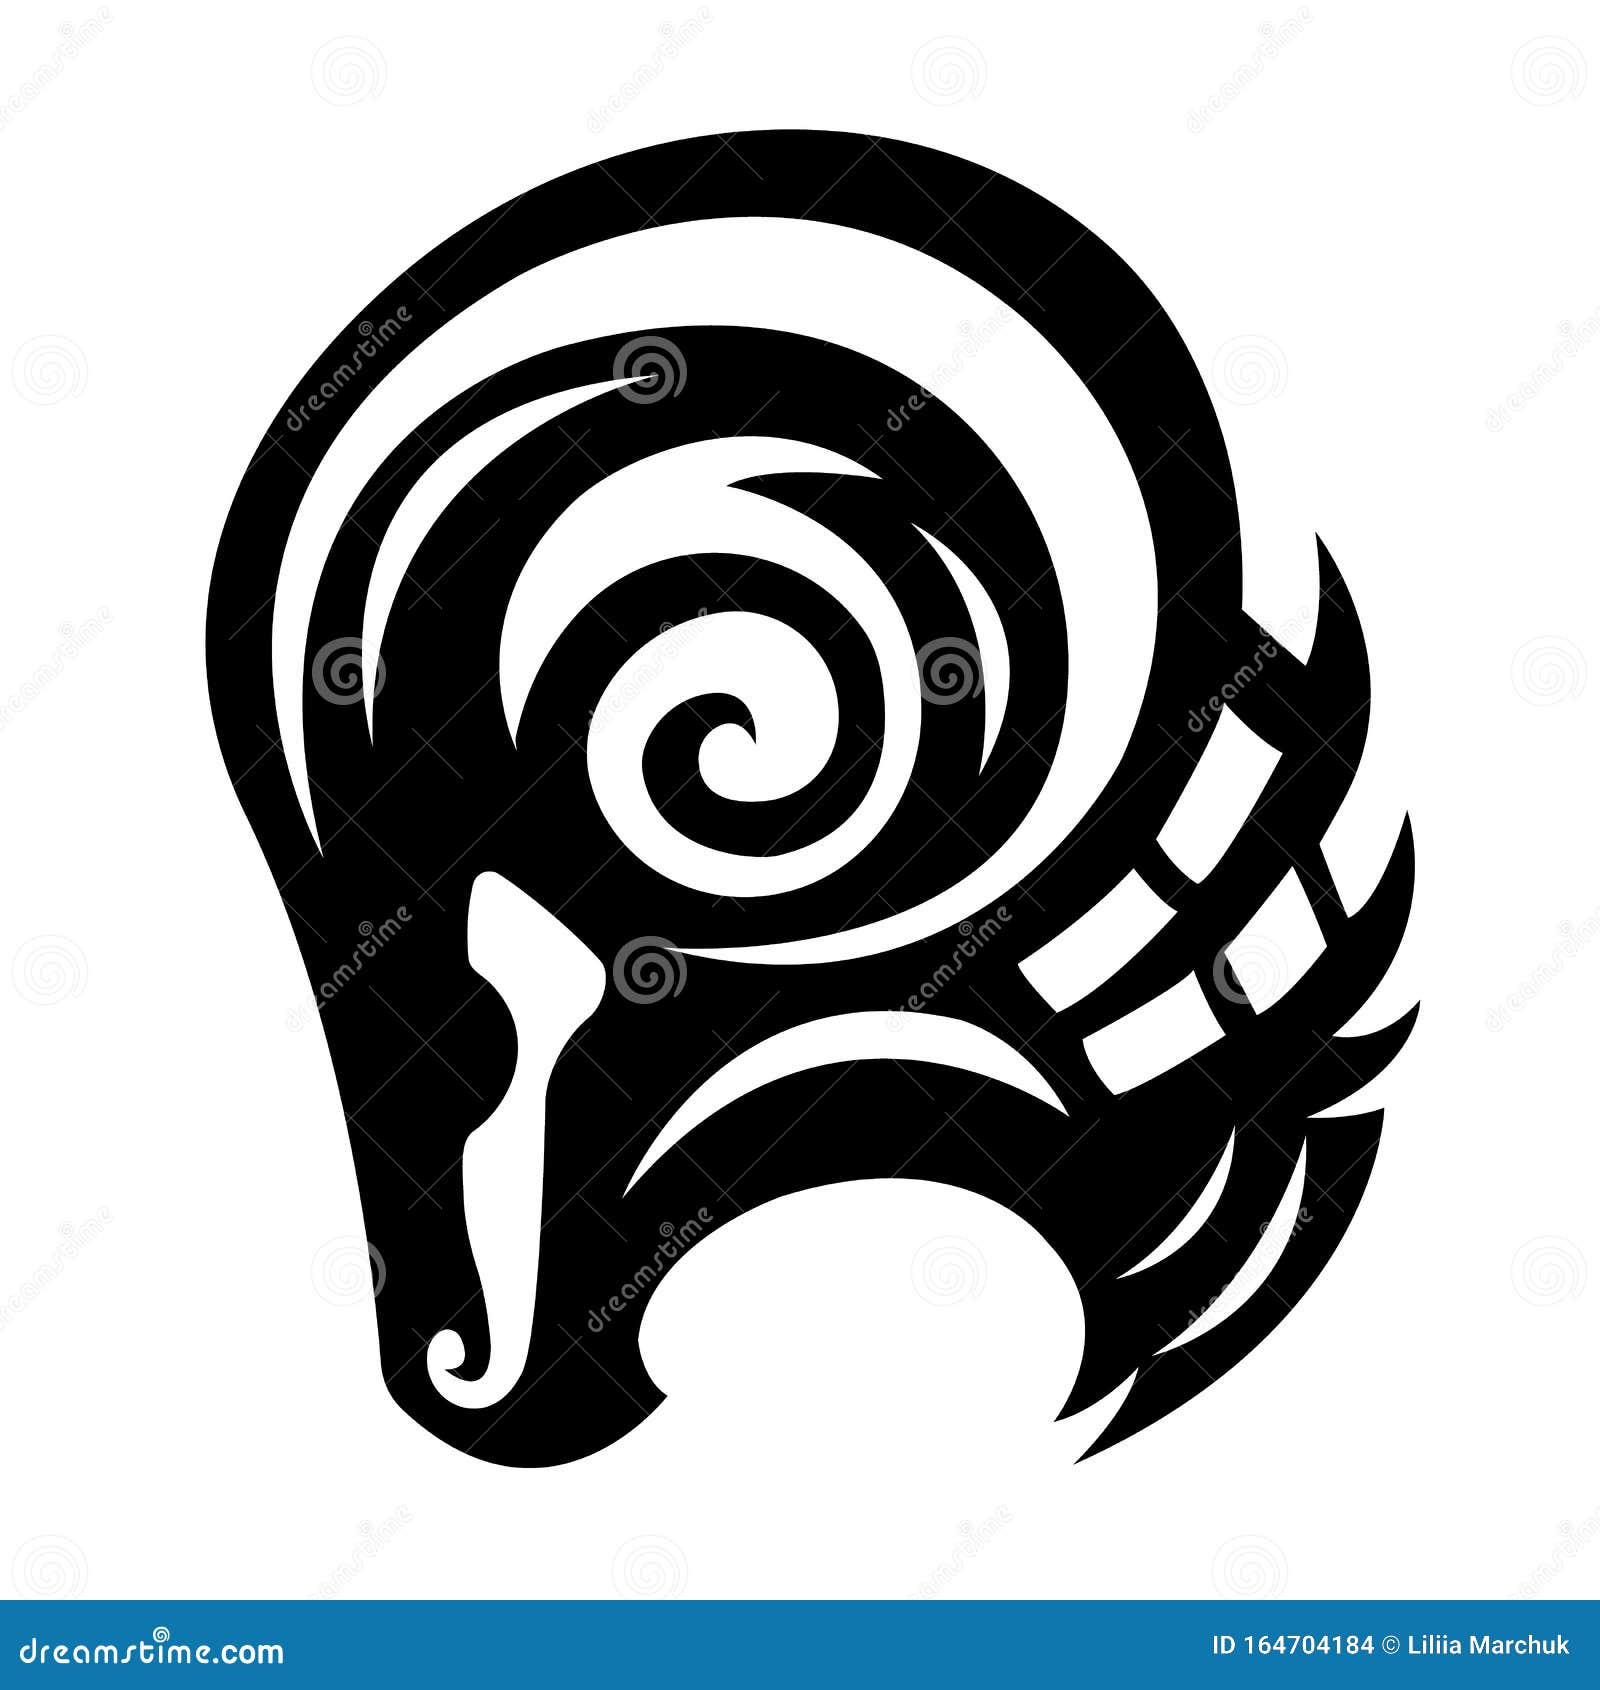 Aries Graphic Icon. Zodiac Sign. Ram Head Painted in Black Color Sign ...